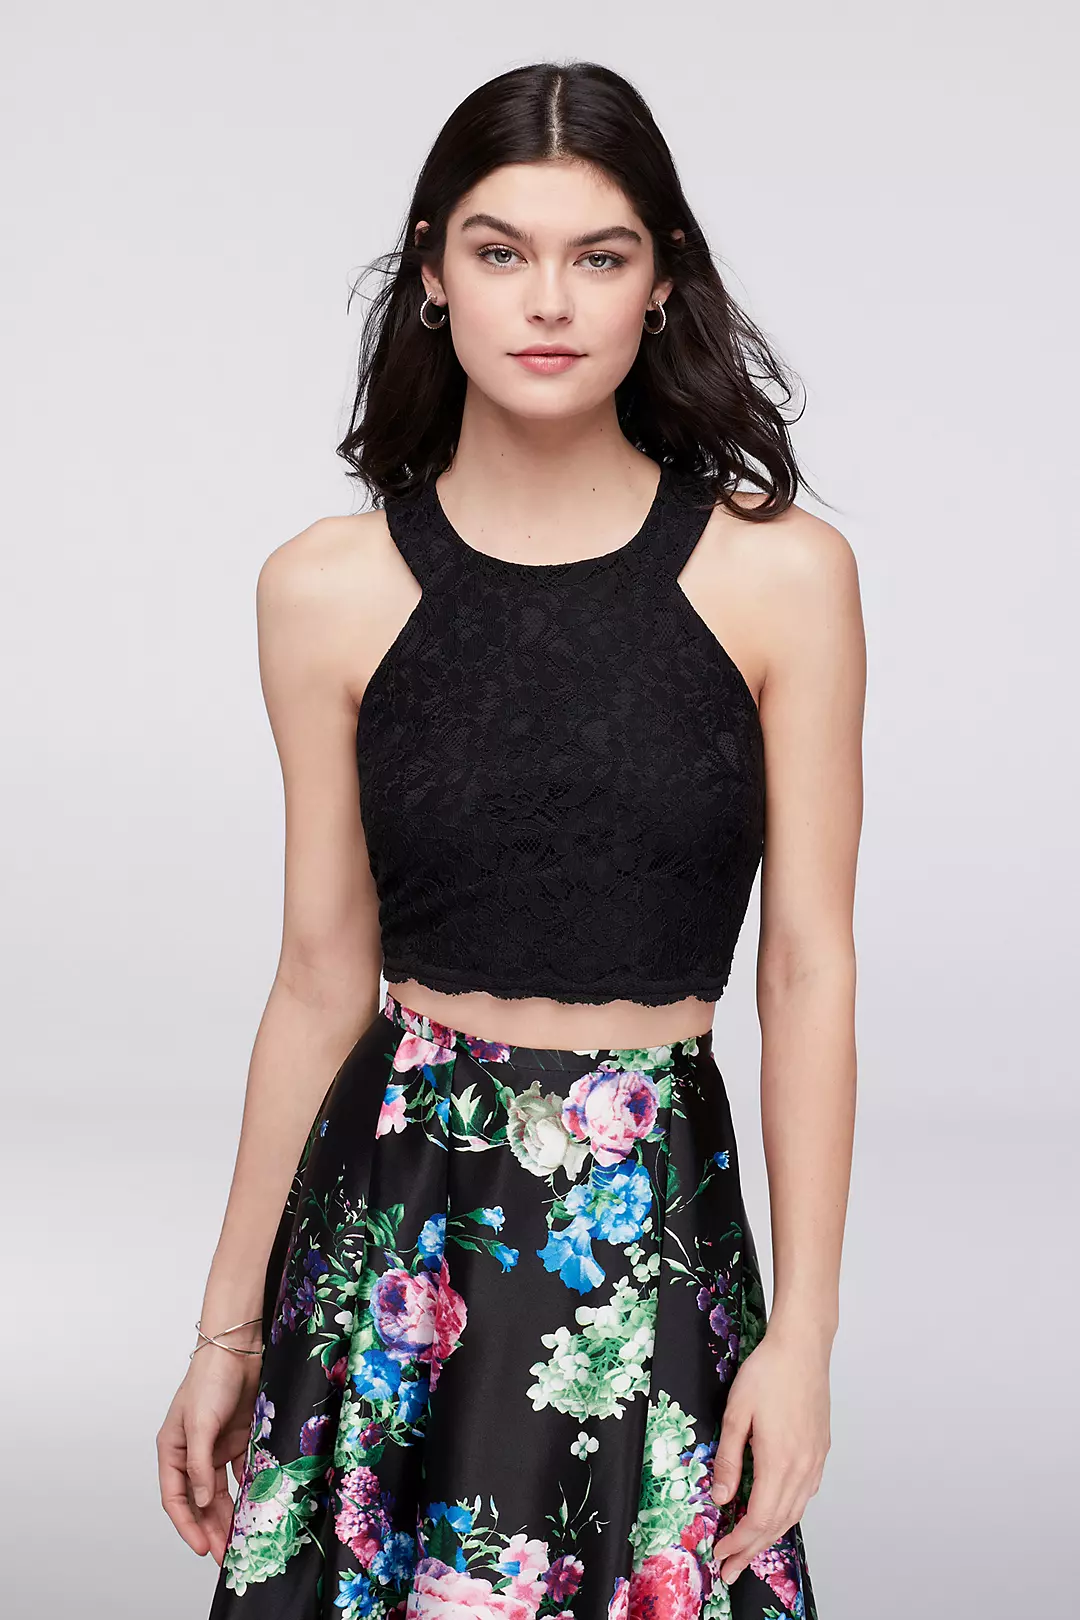 Floral crop top outfit